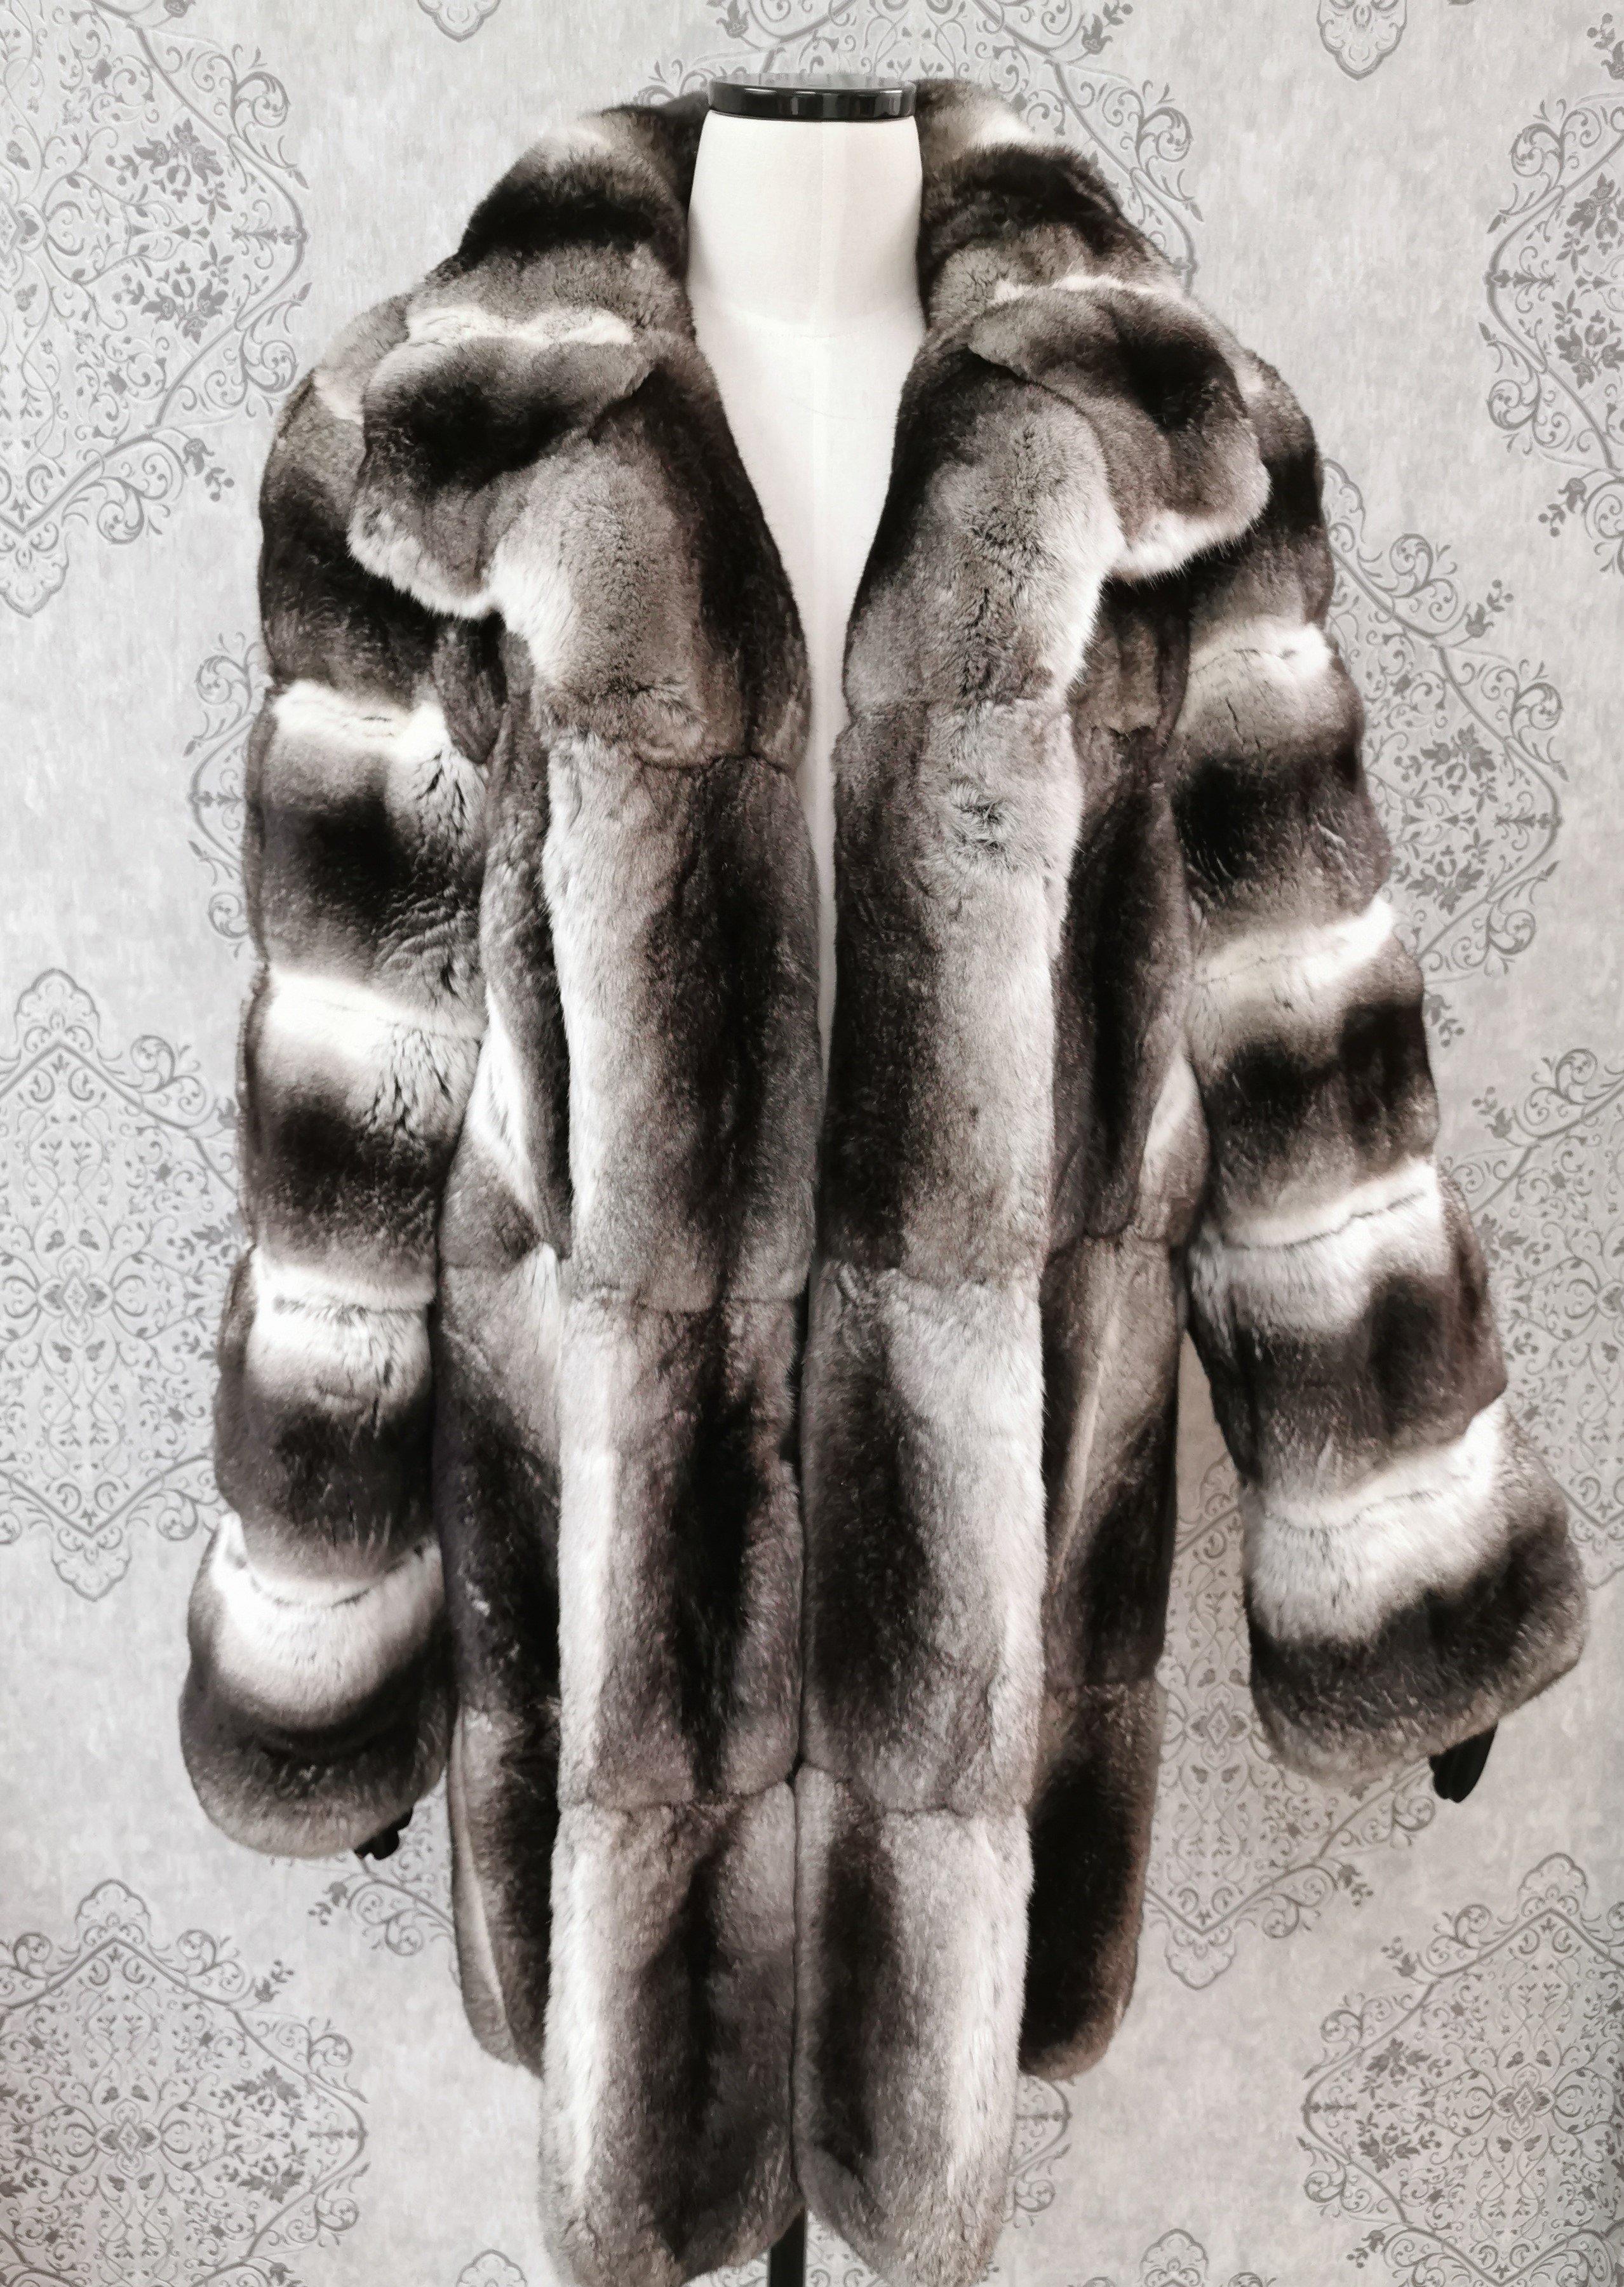 John Galliano Grey Chinchilla Fur Three-Quarter Length coat 

Short collar, straight sleeves, dual seam pockets at hips and German hook-and-eye closures at front

Made in France

SIZE (16) (equivalent of Size L)

Measurements

Length 35